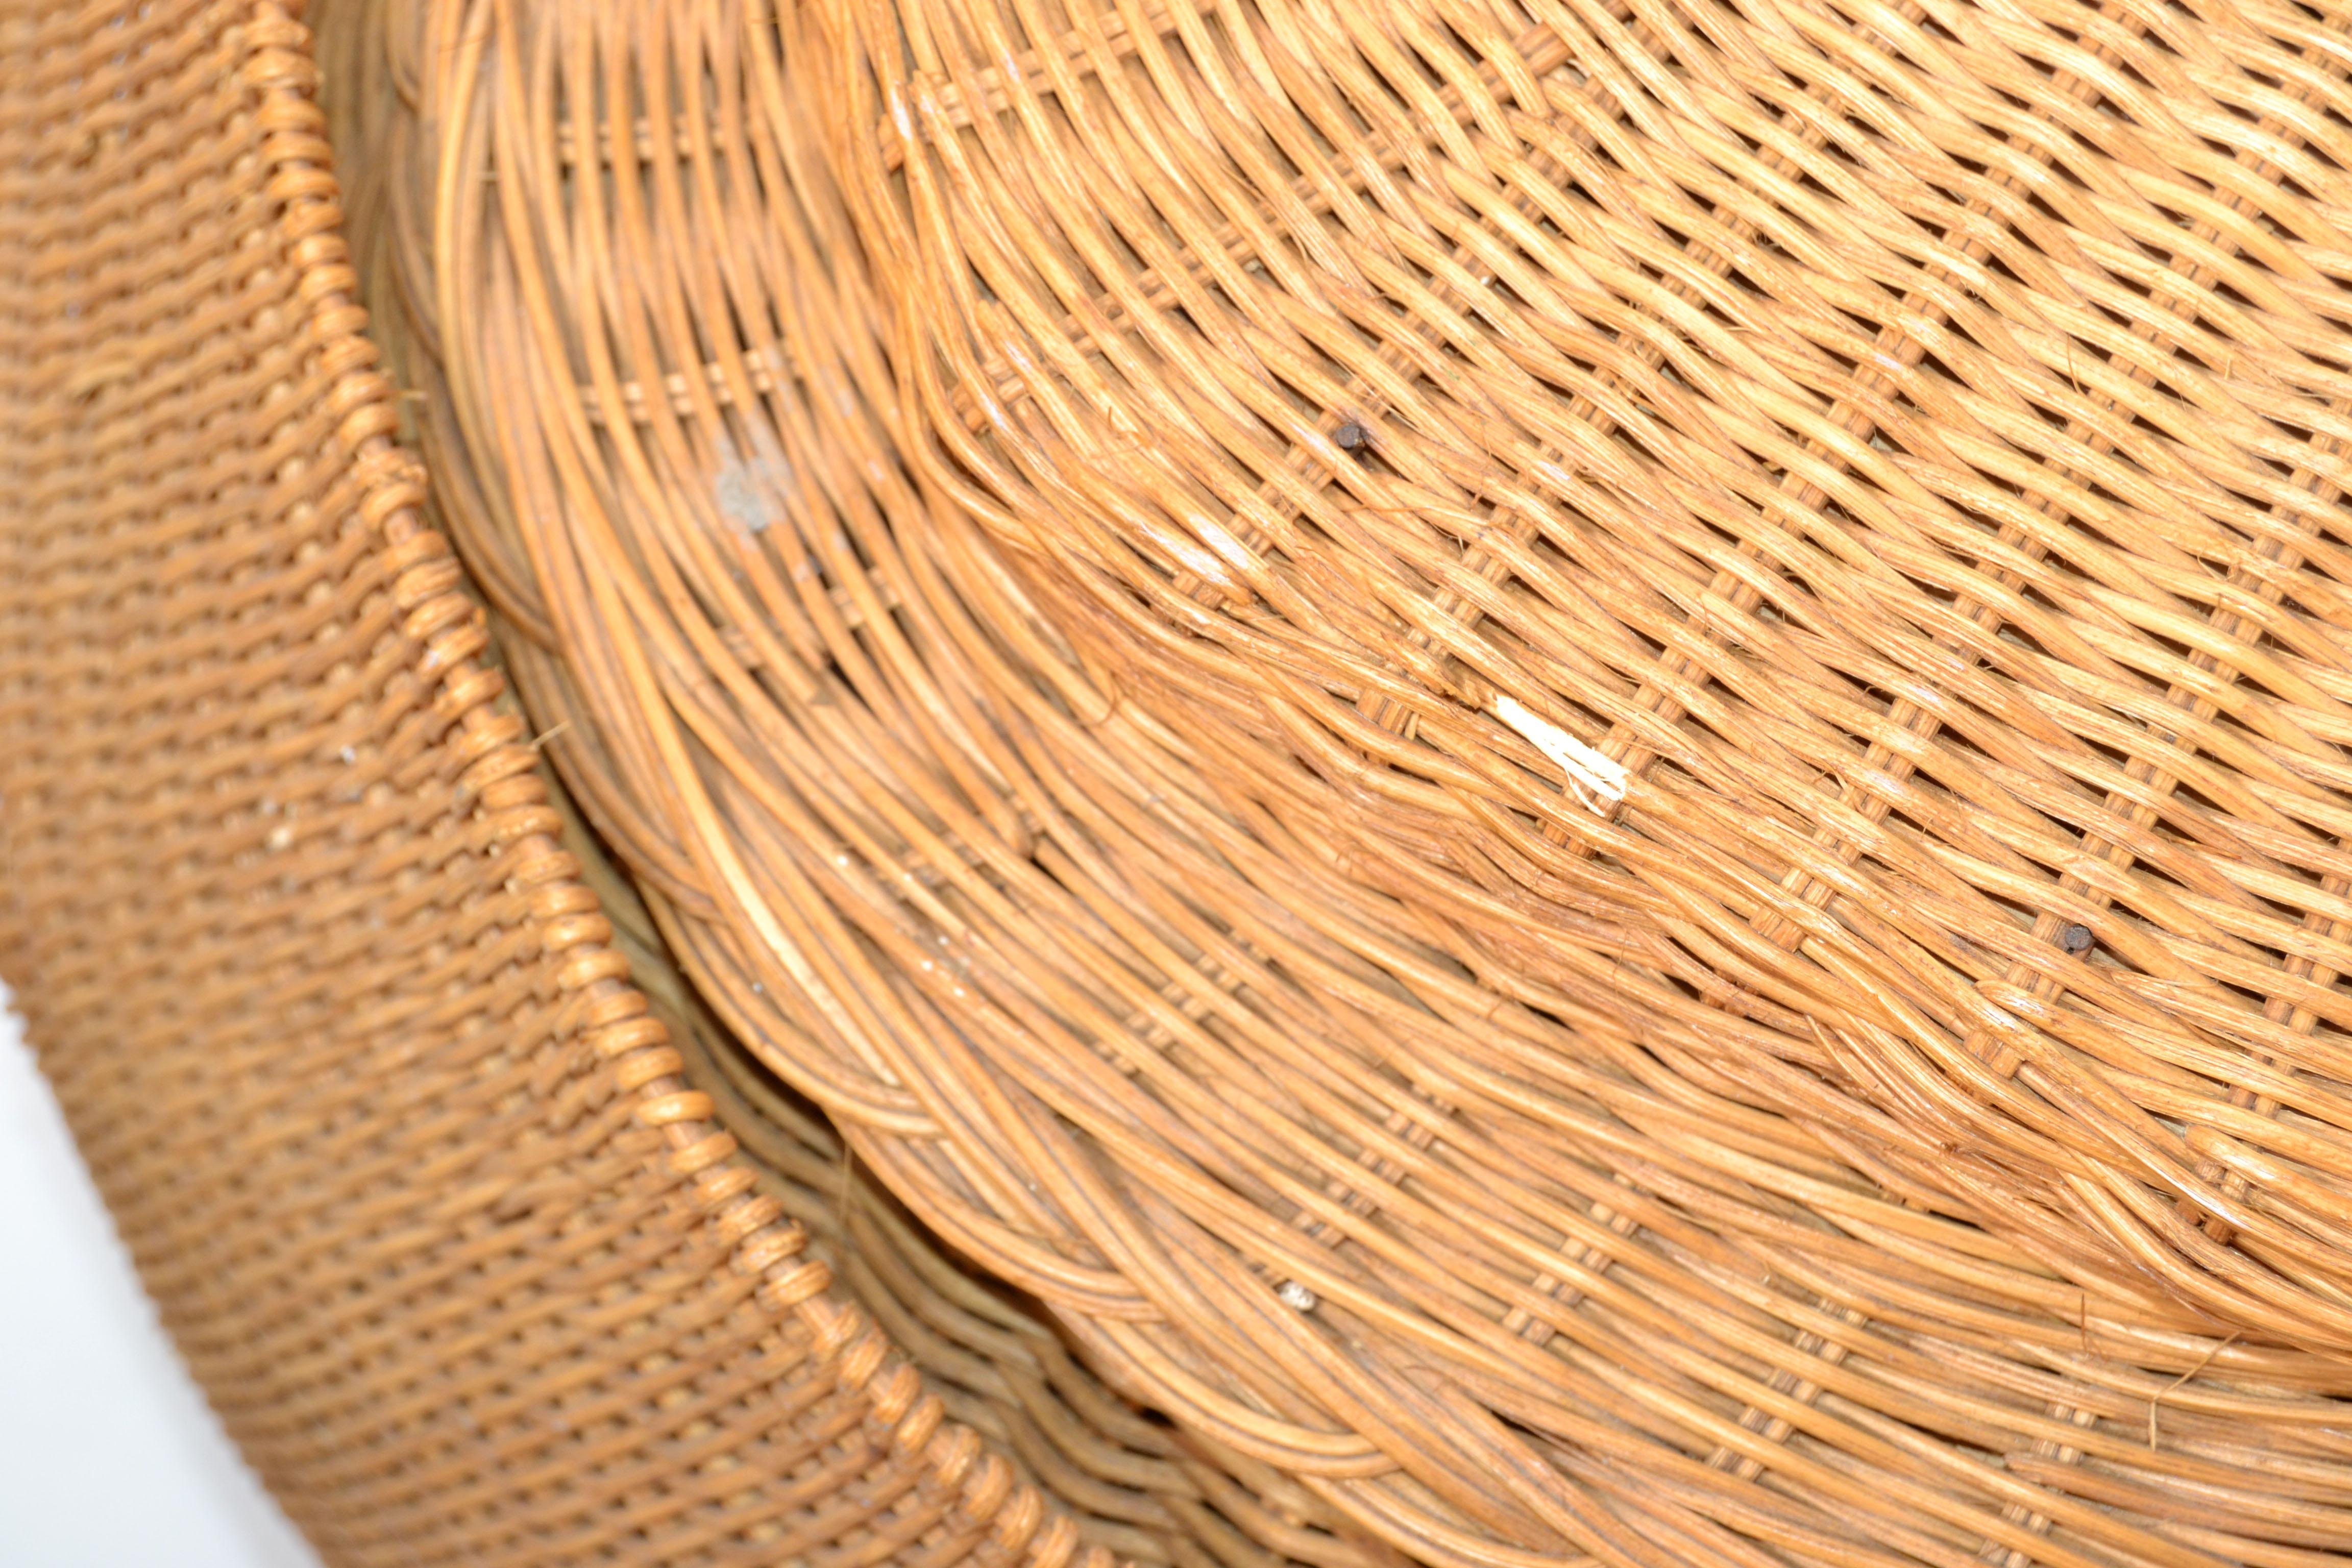 Sculptural Hand-Woven Rattan Swan Coffee or Cocktail Table Round Glass Top 1970 For Sale 2